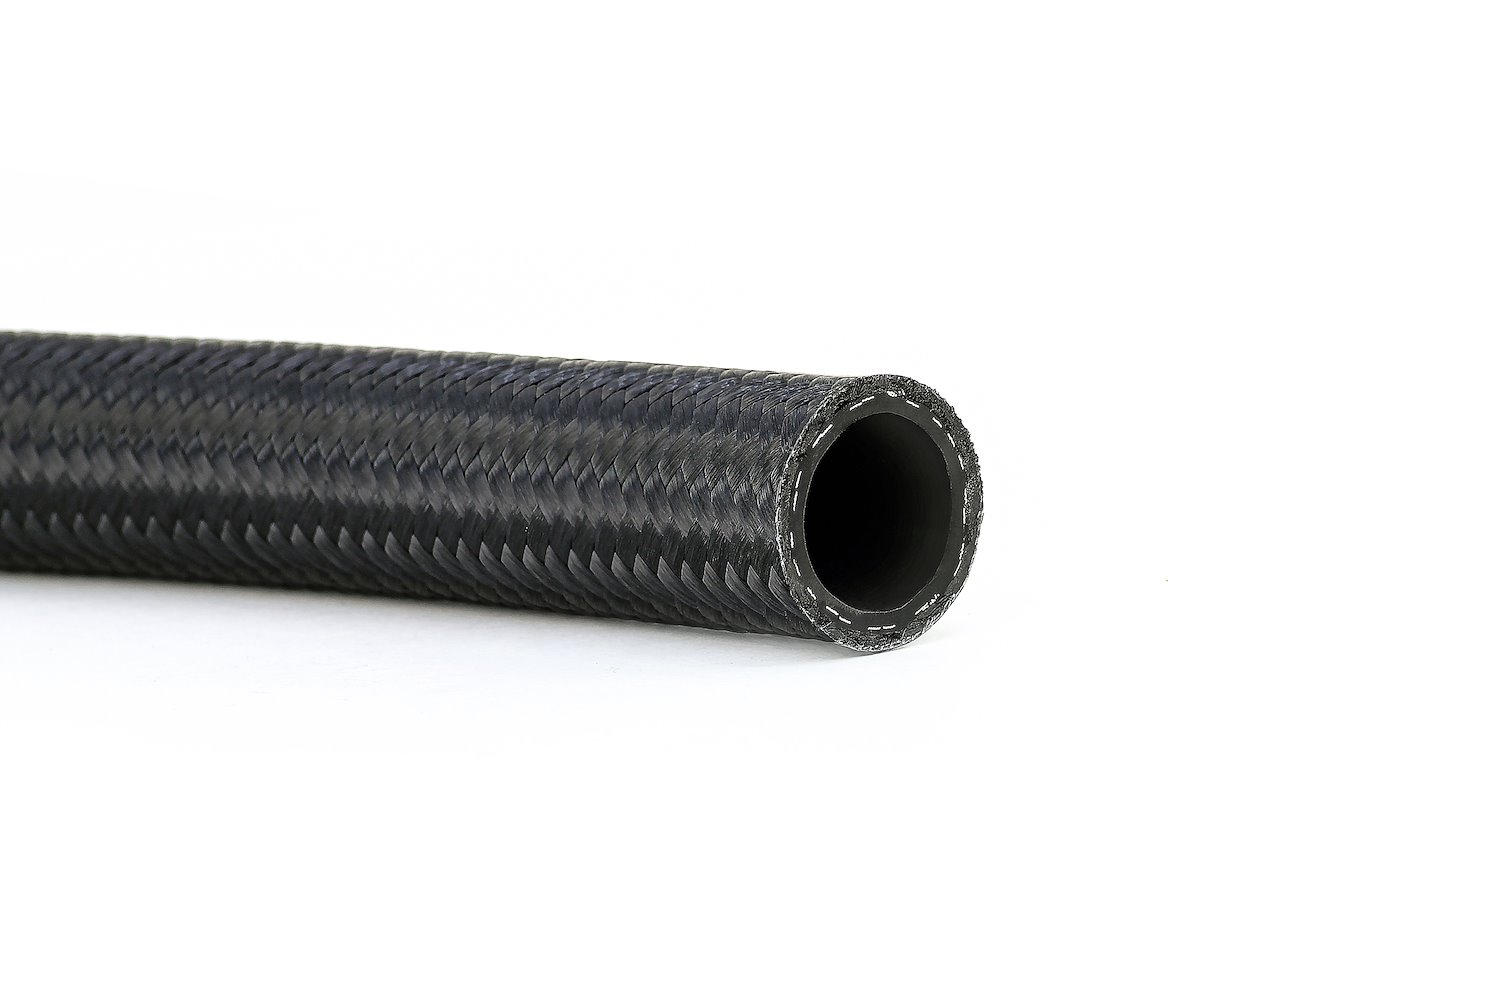 250-06 250 Series Nylon Braided Rubber Hose, Stainless Steel Reinforced Hose, For 250 Series Reusable An Fittings